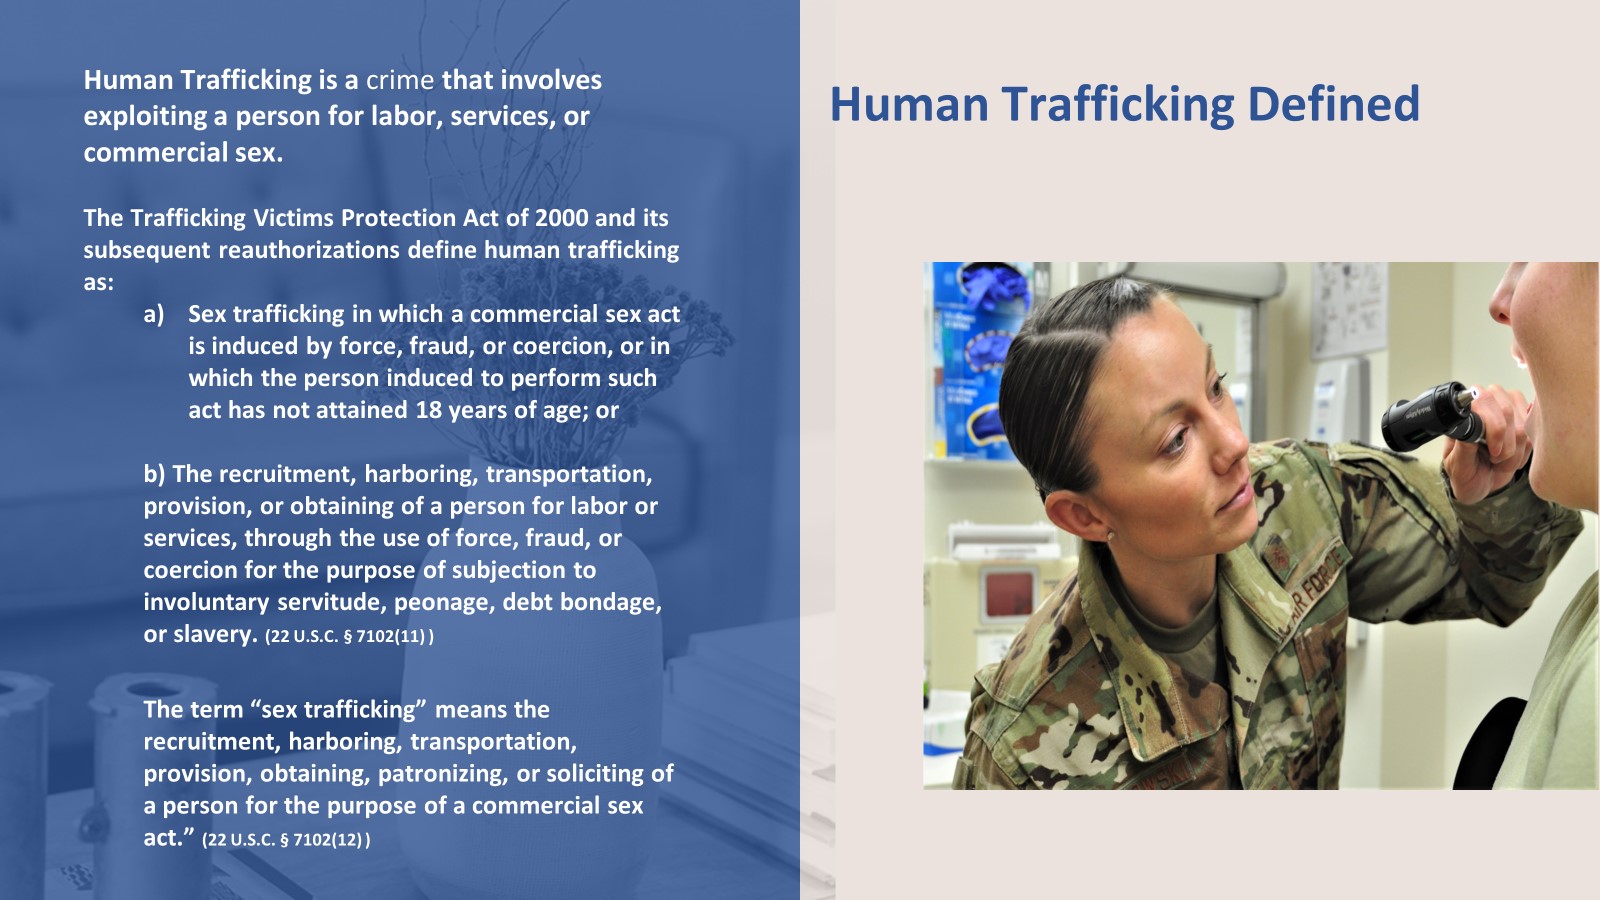 Infographic on human trafficking defined